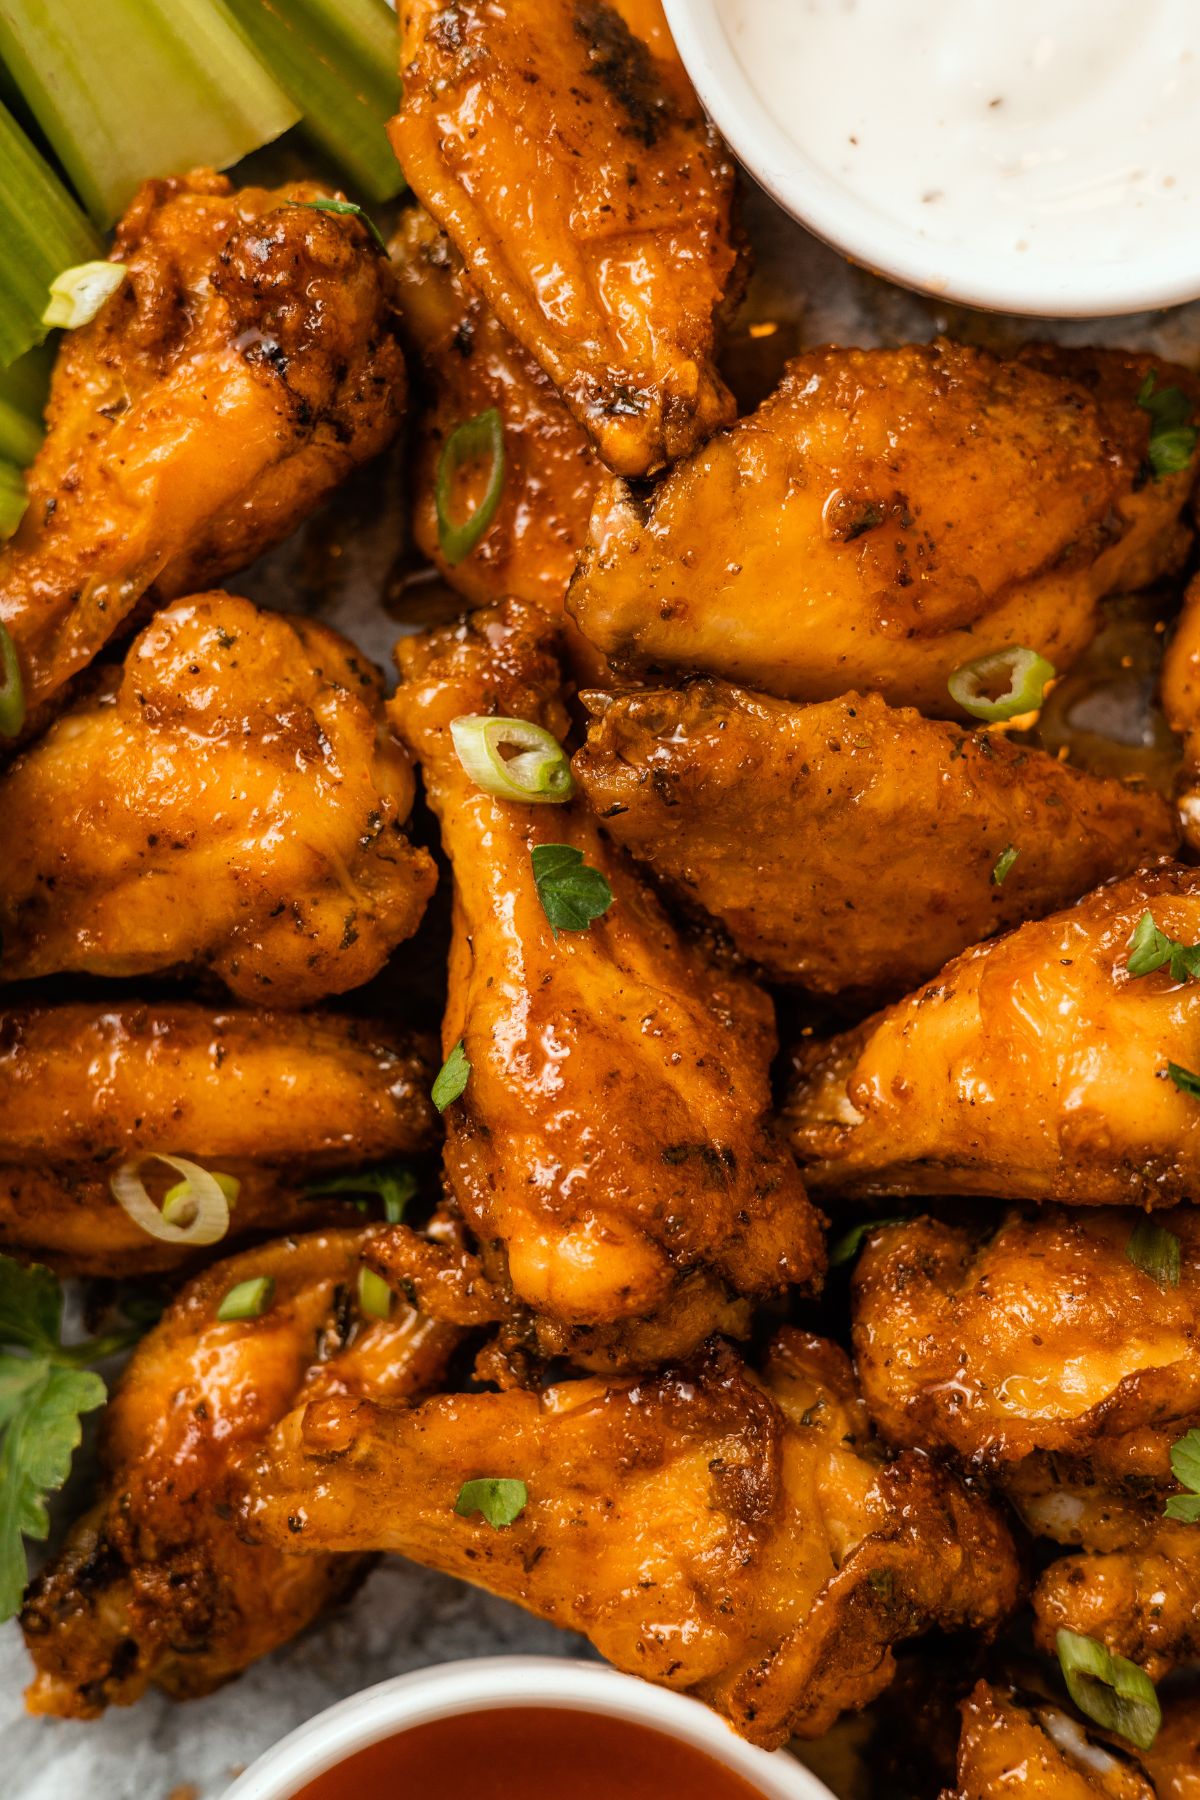 juicy Honey Buffalo Wings (hot honey wings) with crispier skin on a tray with sauce